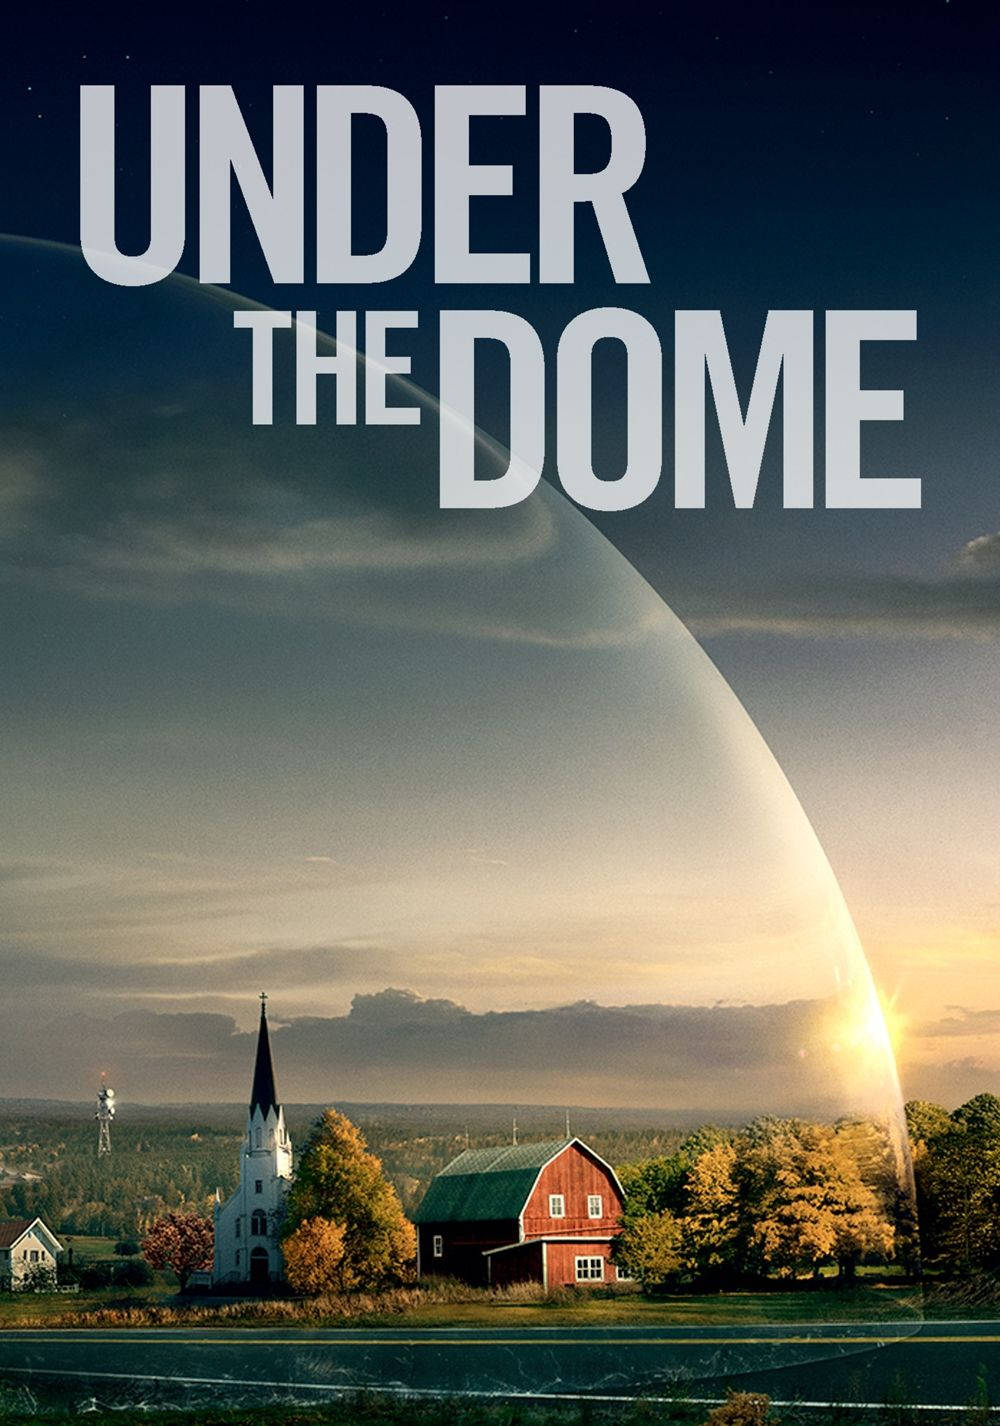 Under The Dome Promo Poster Wallpaper